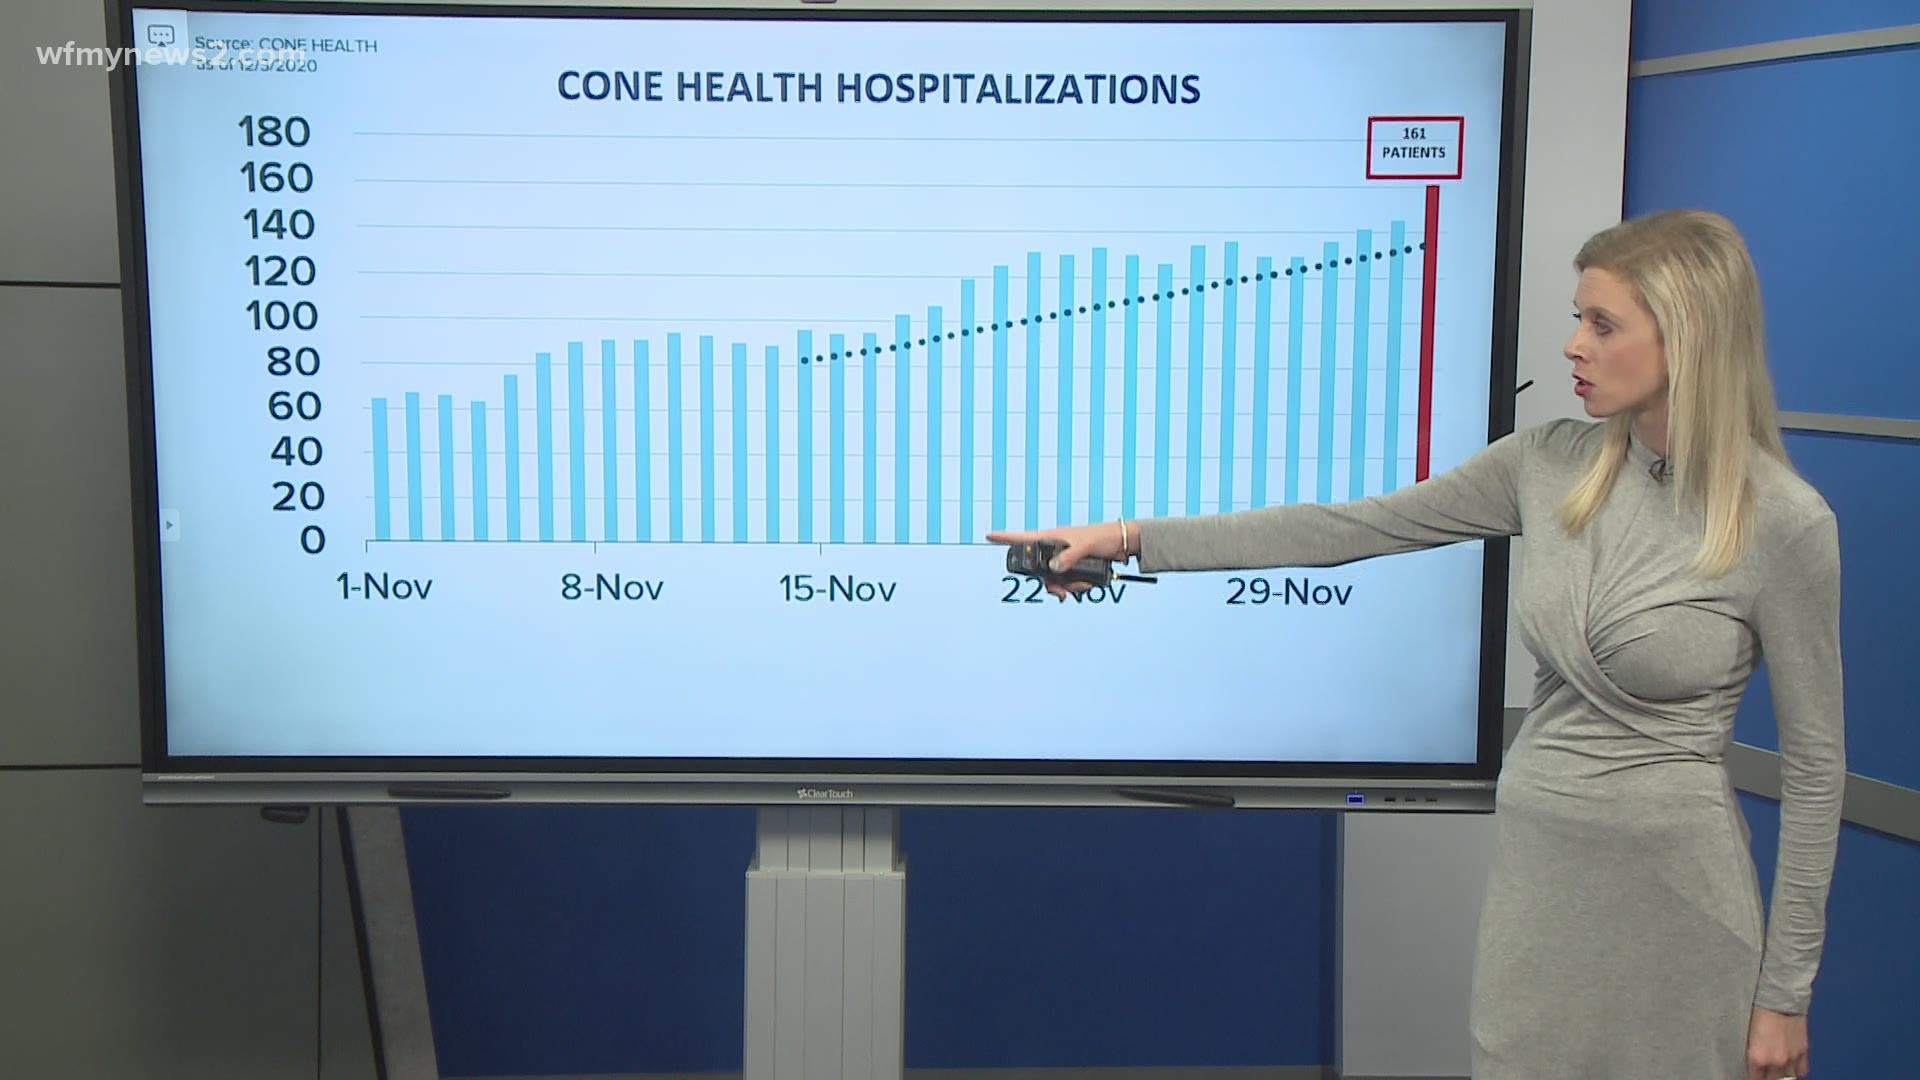 Cone Health is treating 161 COVID-19 patients – the highest volume yet -- at its campuses, as of Thursday, Dec. 3.